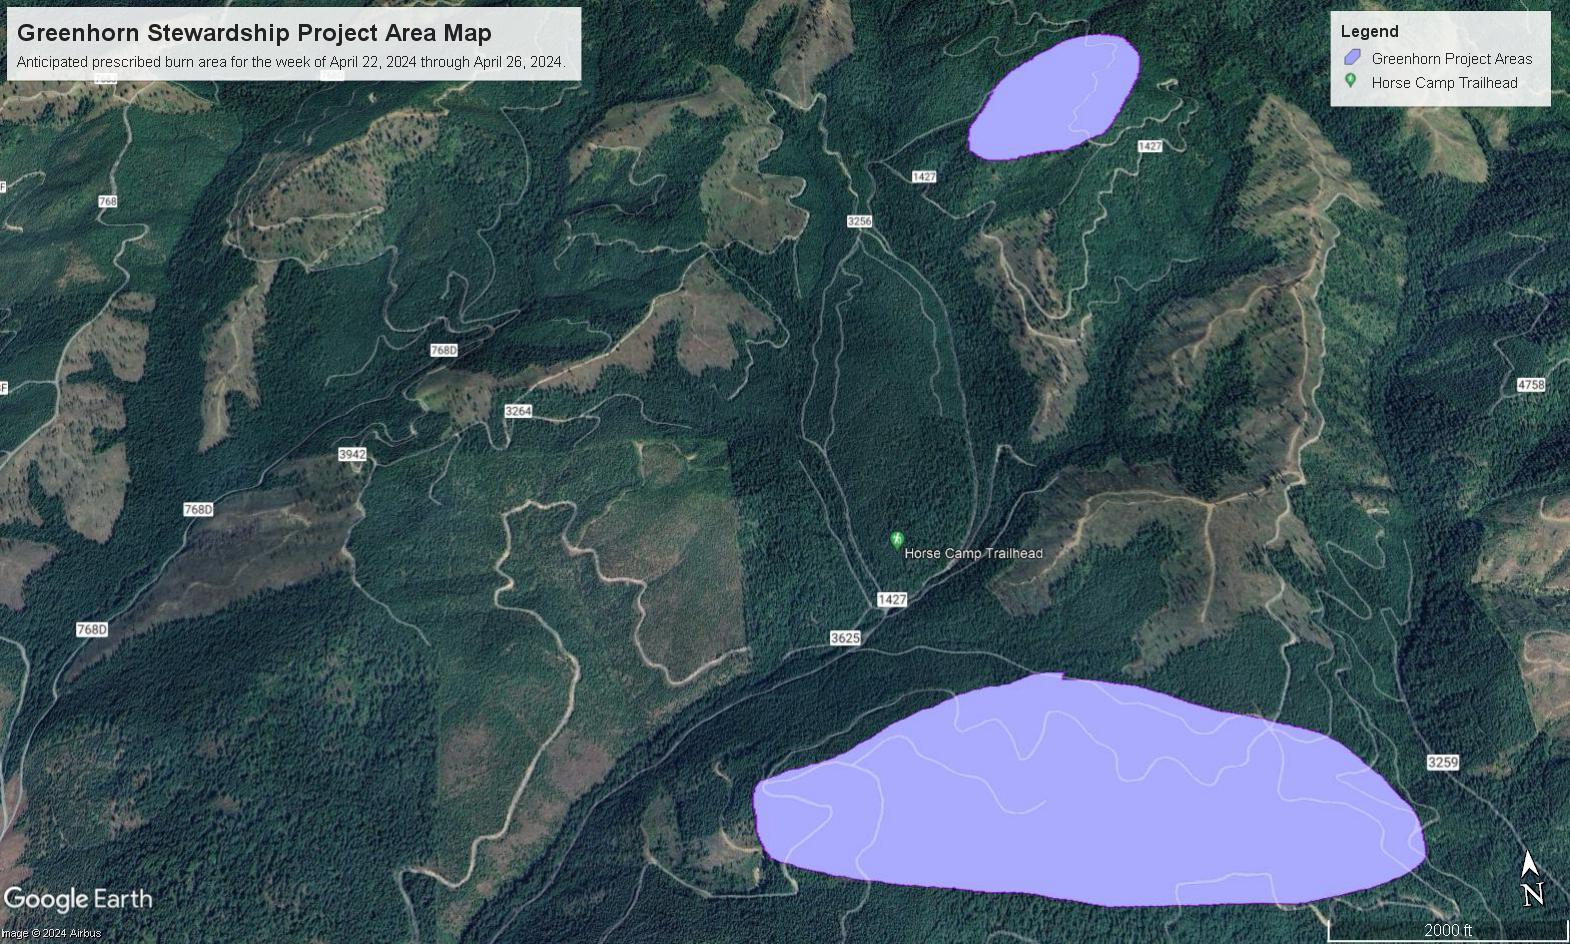 Satellite image depicting two different areas on the Greenhorn Stewardship Project near Horse Camp Trailhead